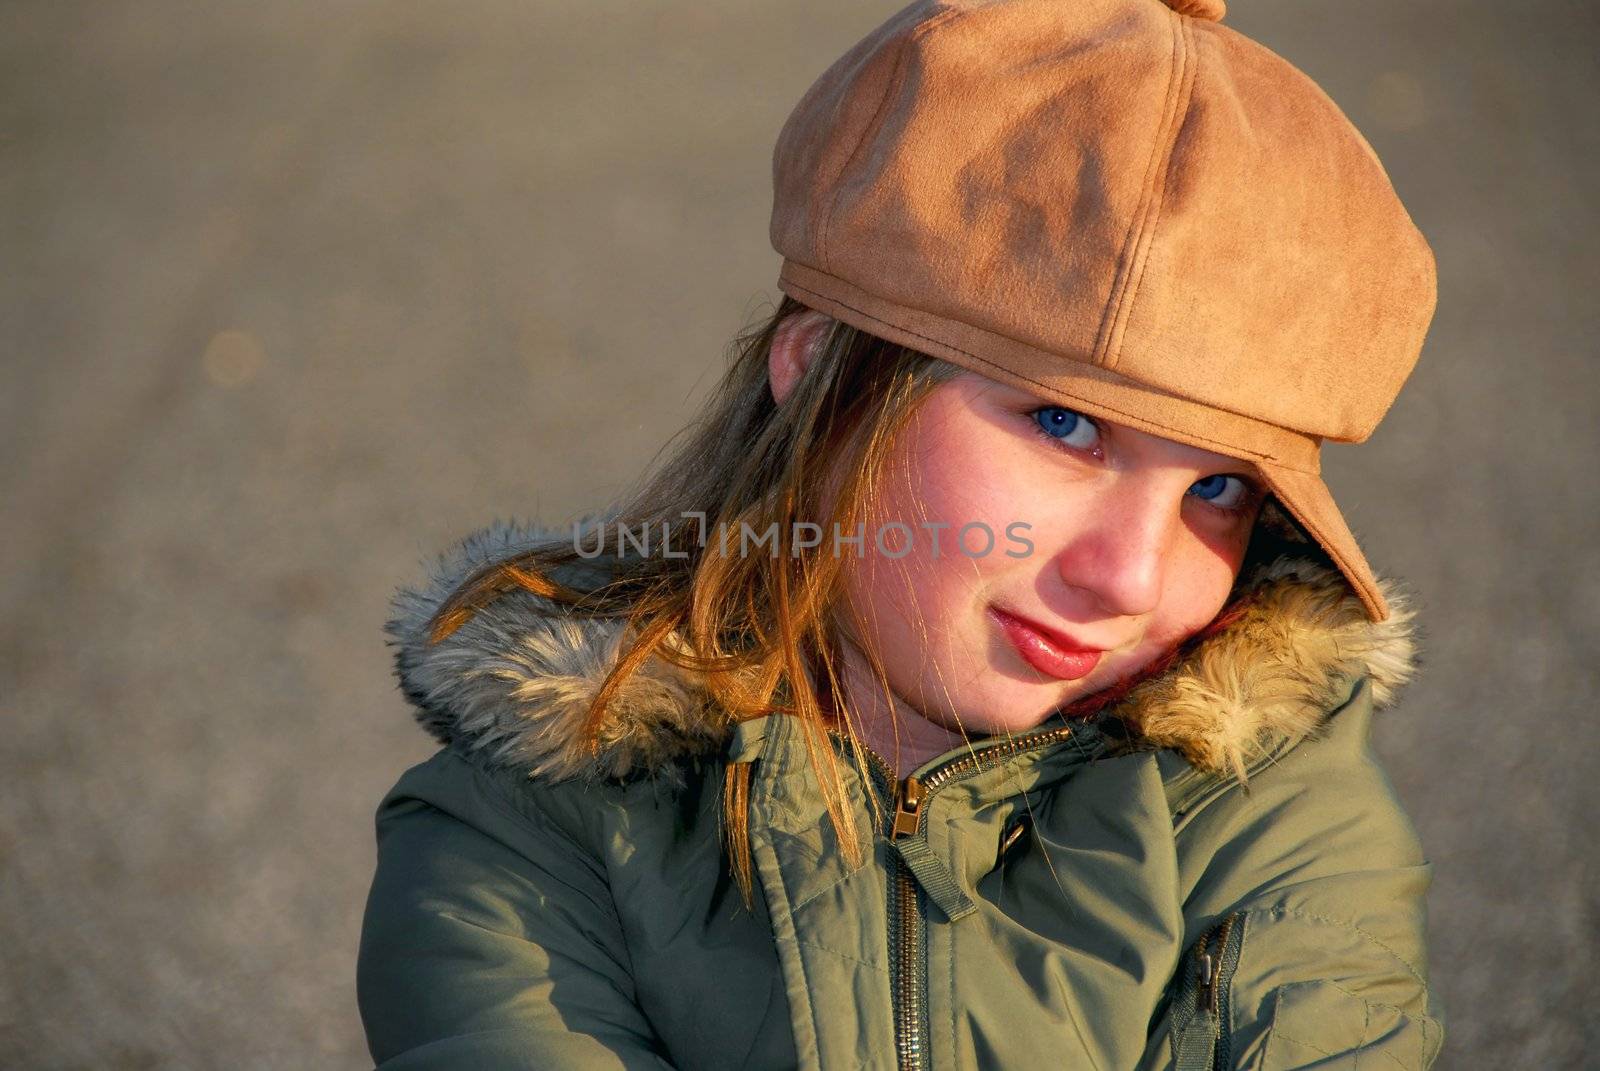 Portriat of a coy smiling girl in winter or fall clothes outside